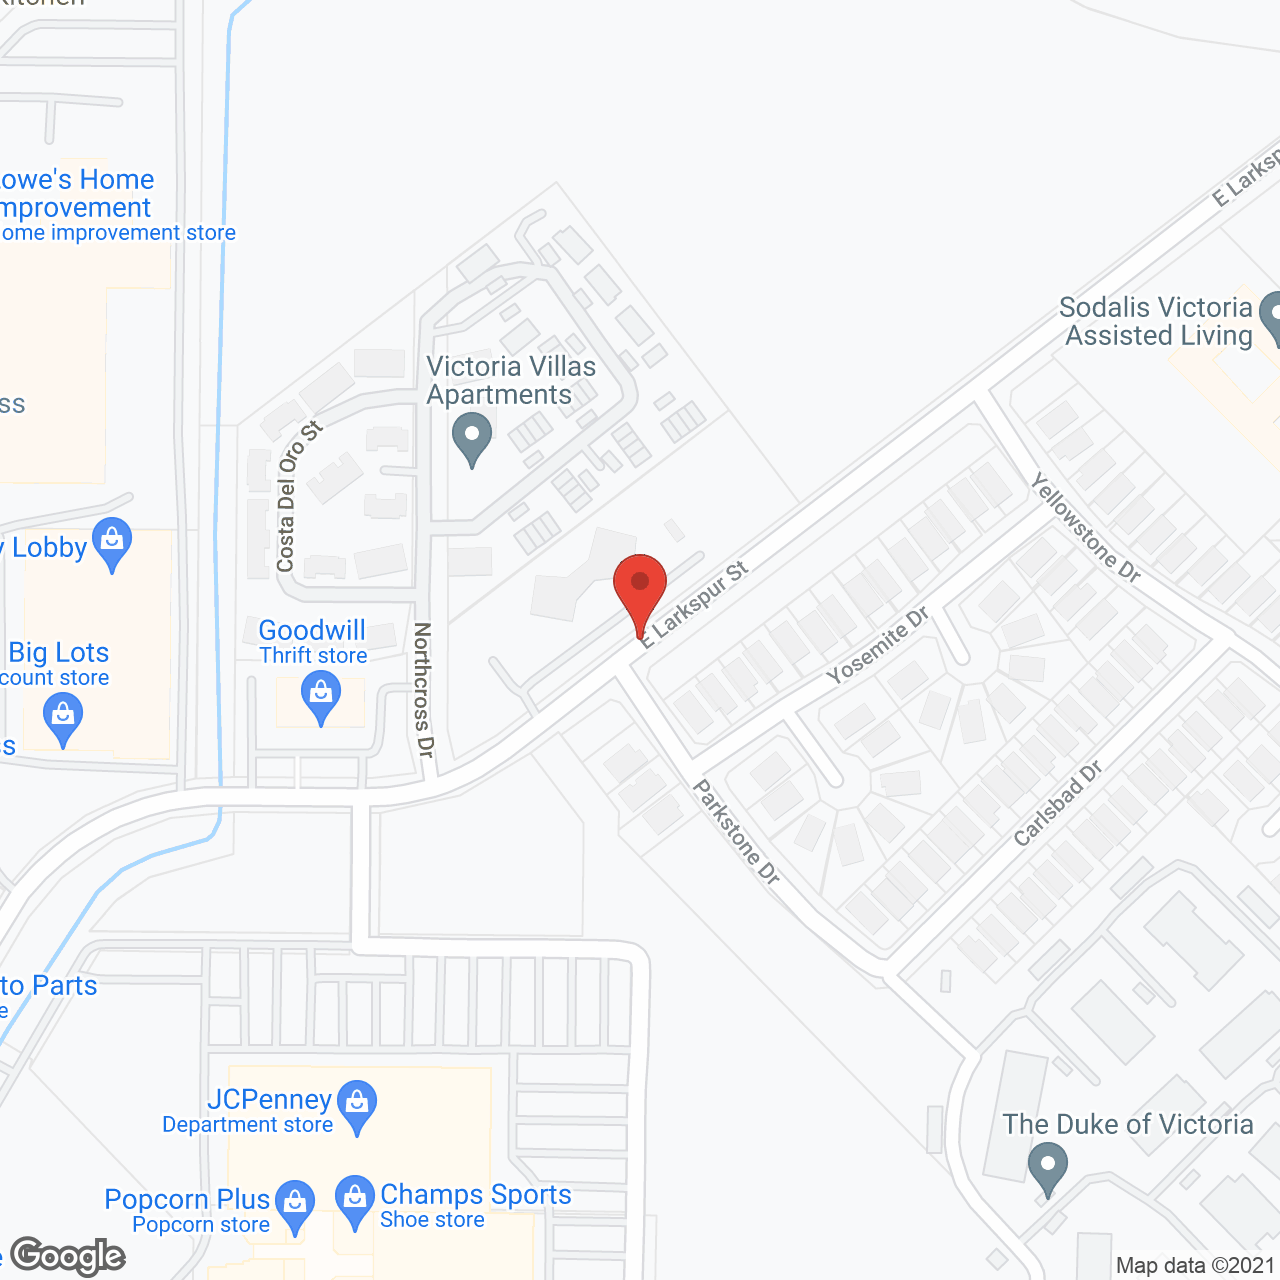 Sodalis Victoria Assisted Living in google map